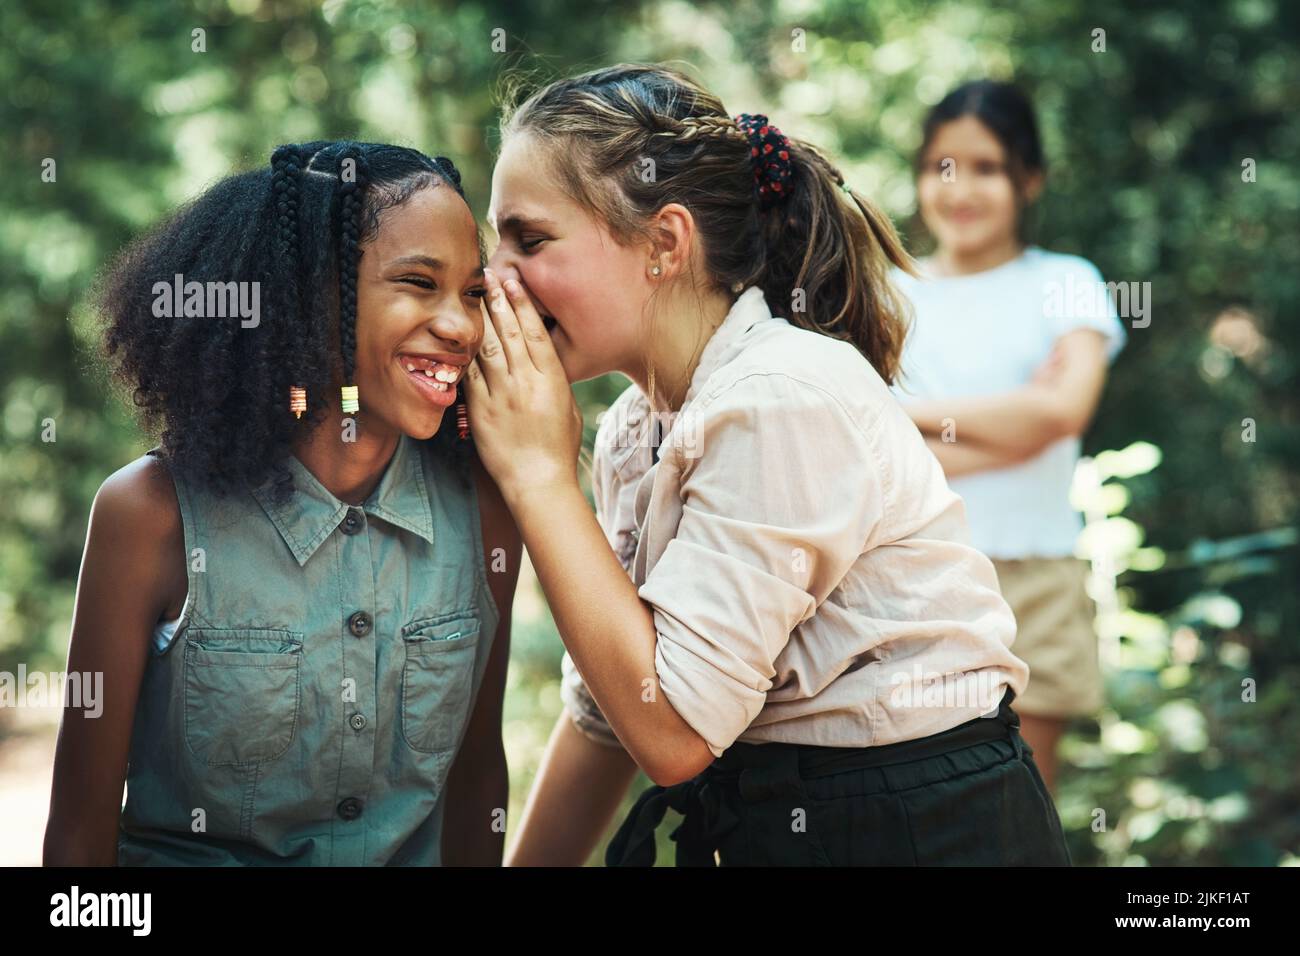 Beware the danger of bullying. two teenage girls gossiping about their friend at summer camp. Stock Photo